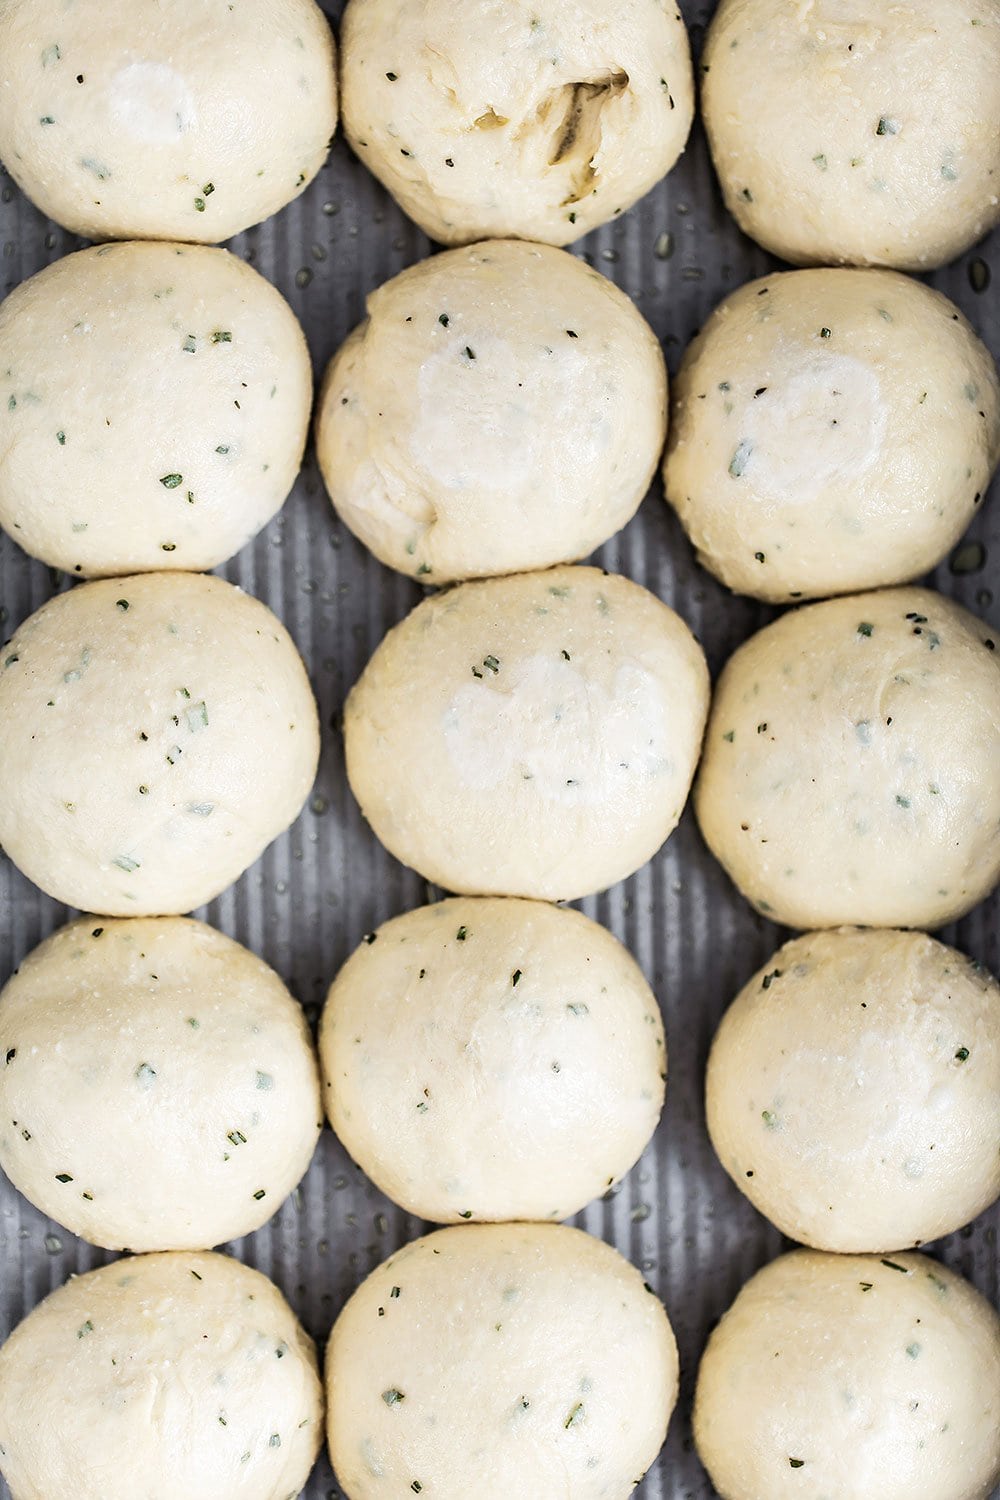 Ricotta Herb Bread Rolls are amazingly soft, tender, and pillowy in texture with tons of rich and earthy flavors. These are bound to become a family favorite!